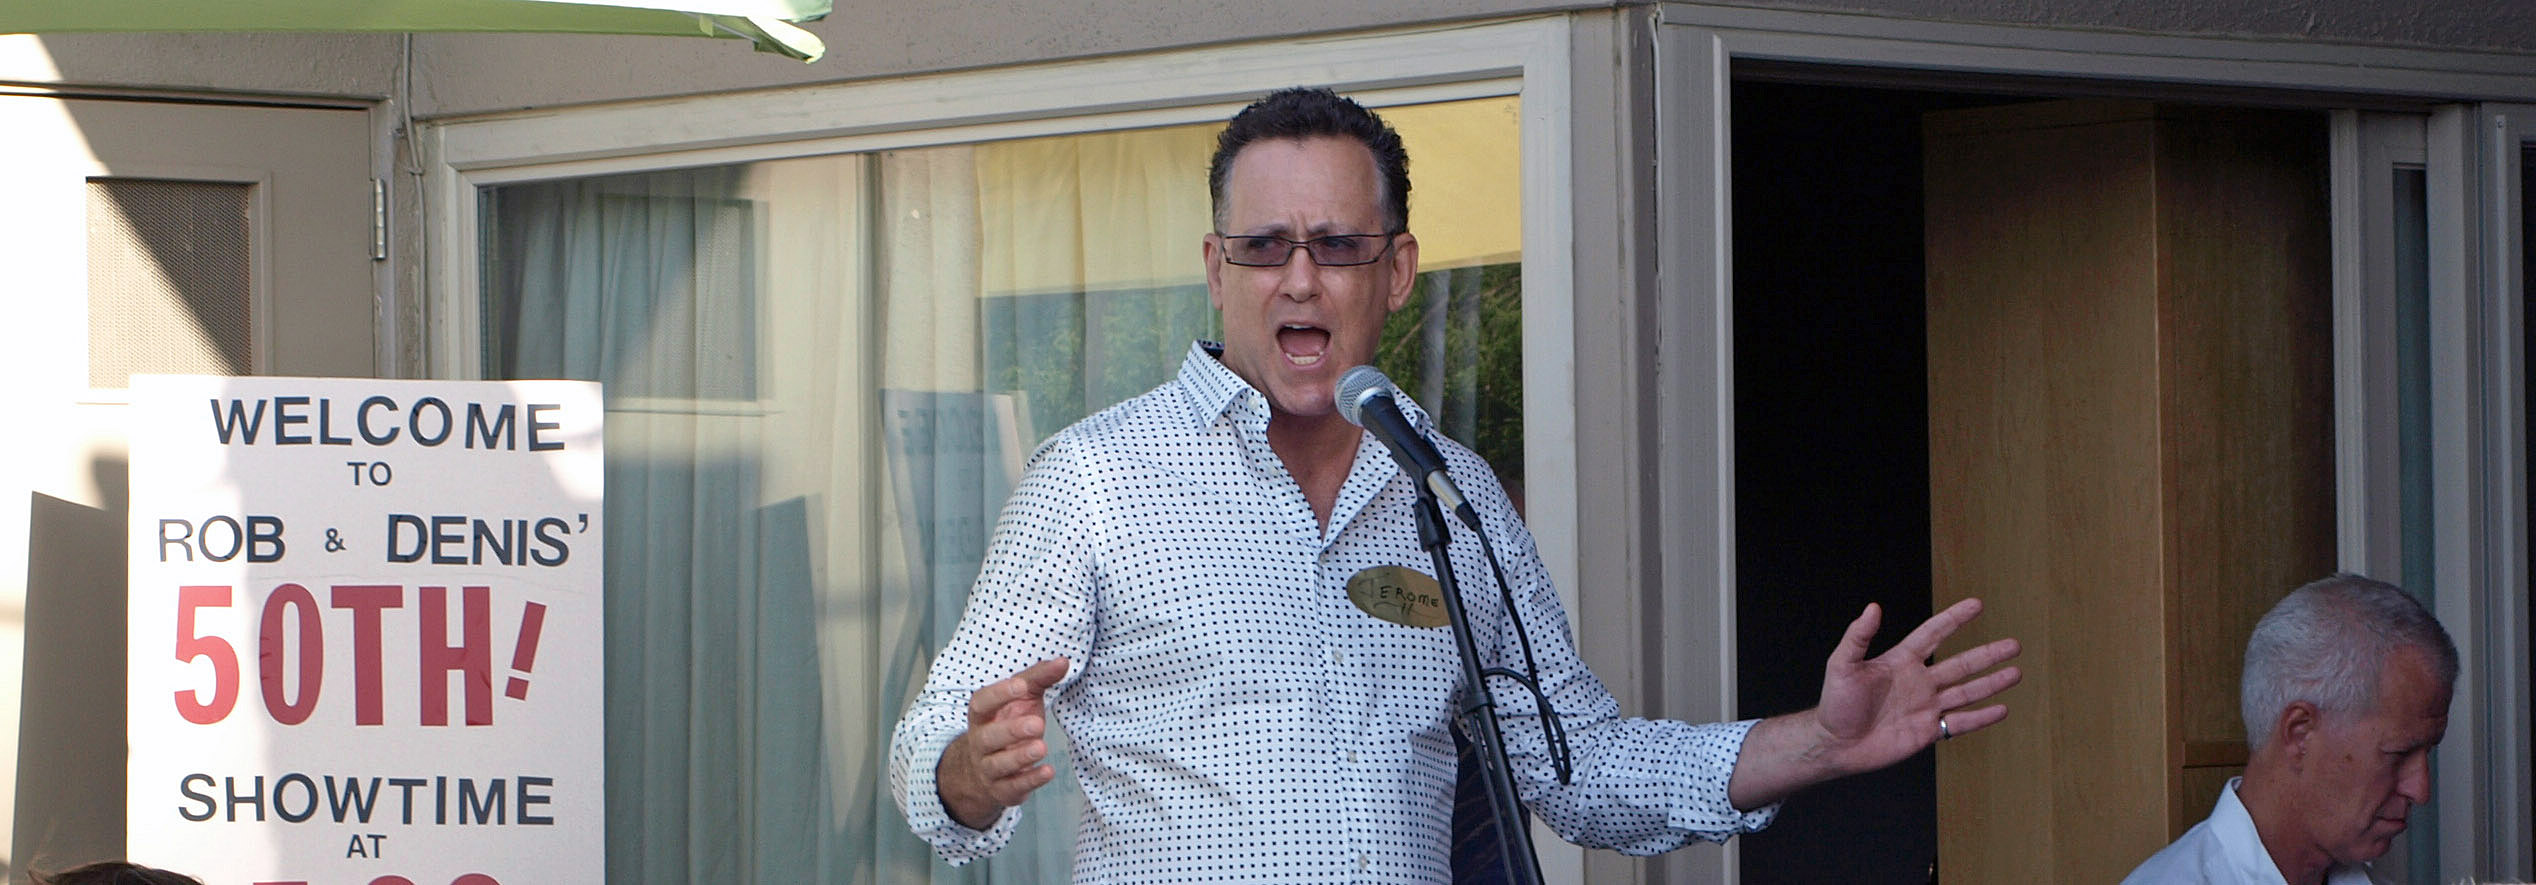 Jerome singing at the party, 2009